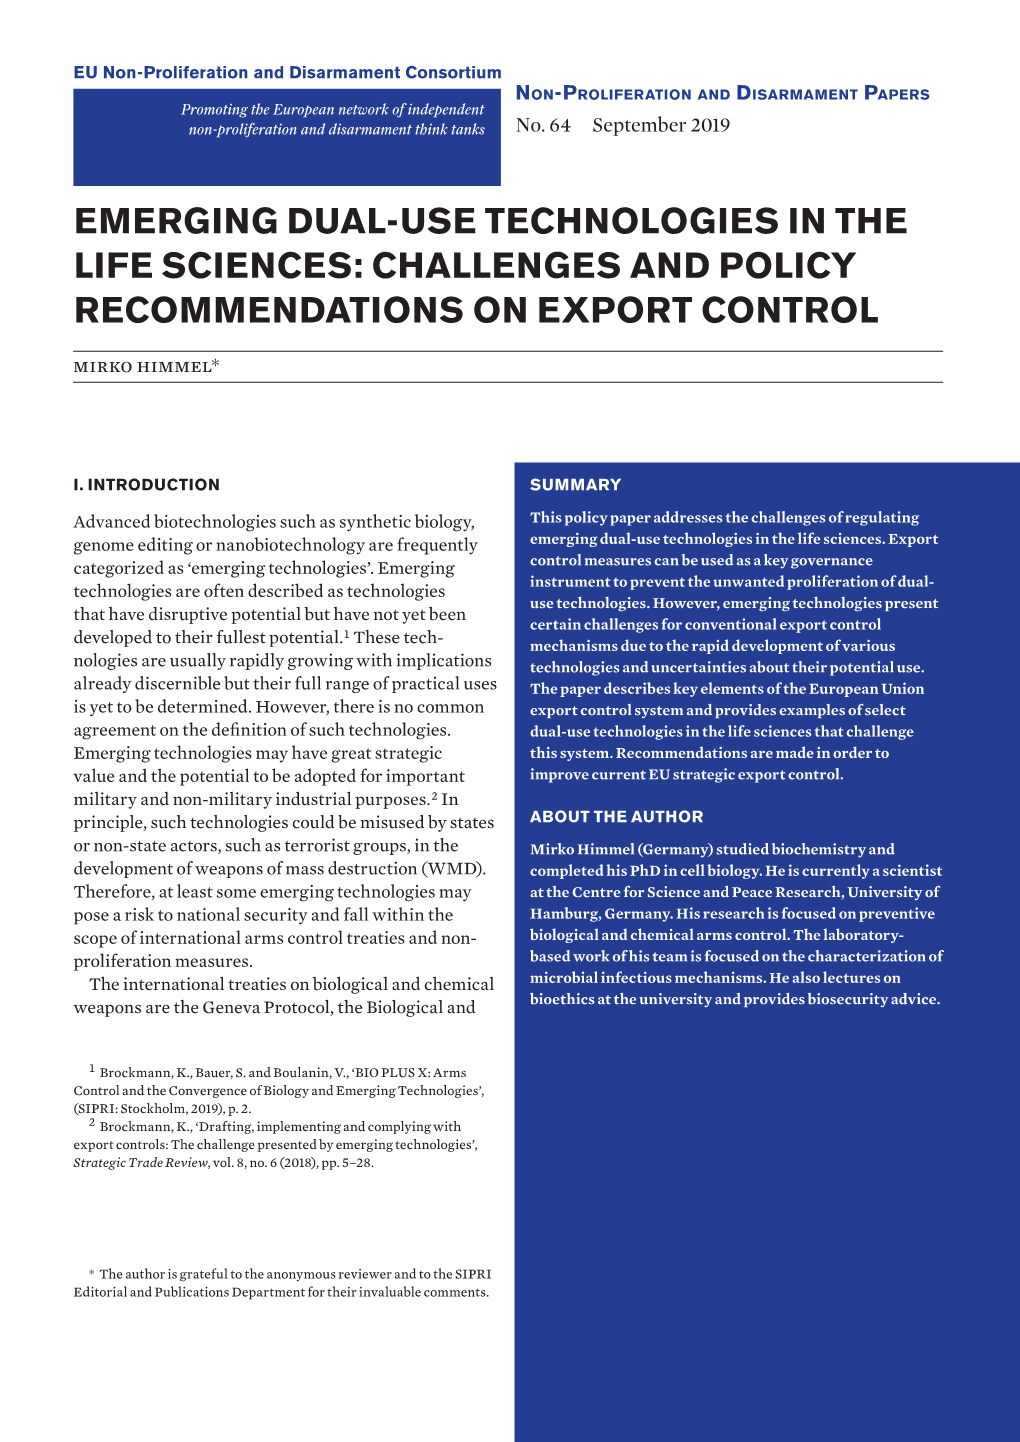 EMERGING DUAL-USE TECHNOLOGIES in the LIFE SCIENCES: CHALLENGES and POLICY RECOMMENDATIONS on EXPORT CONTROL Mirko Himmel*